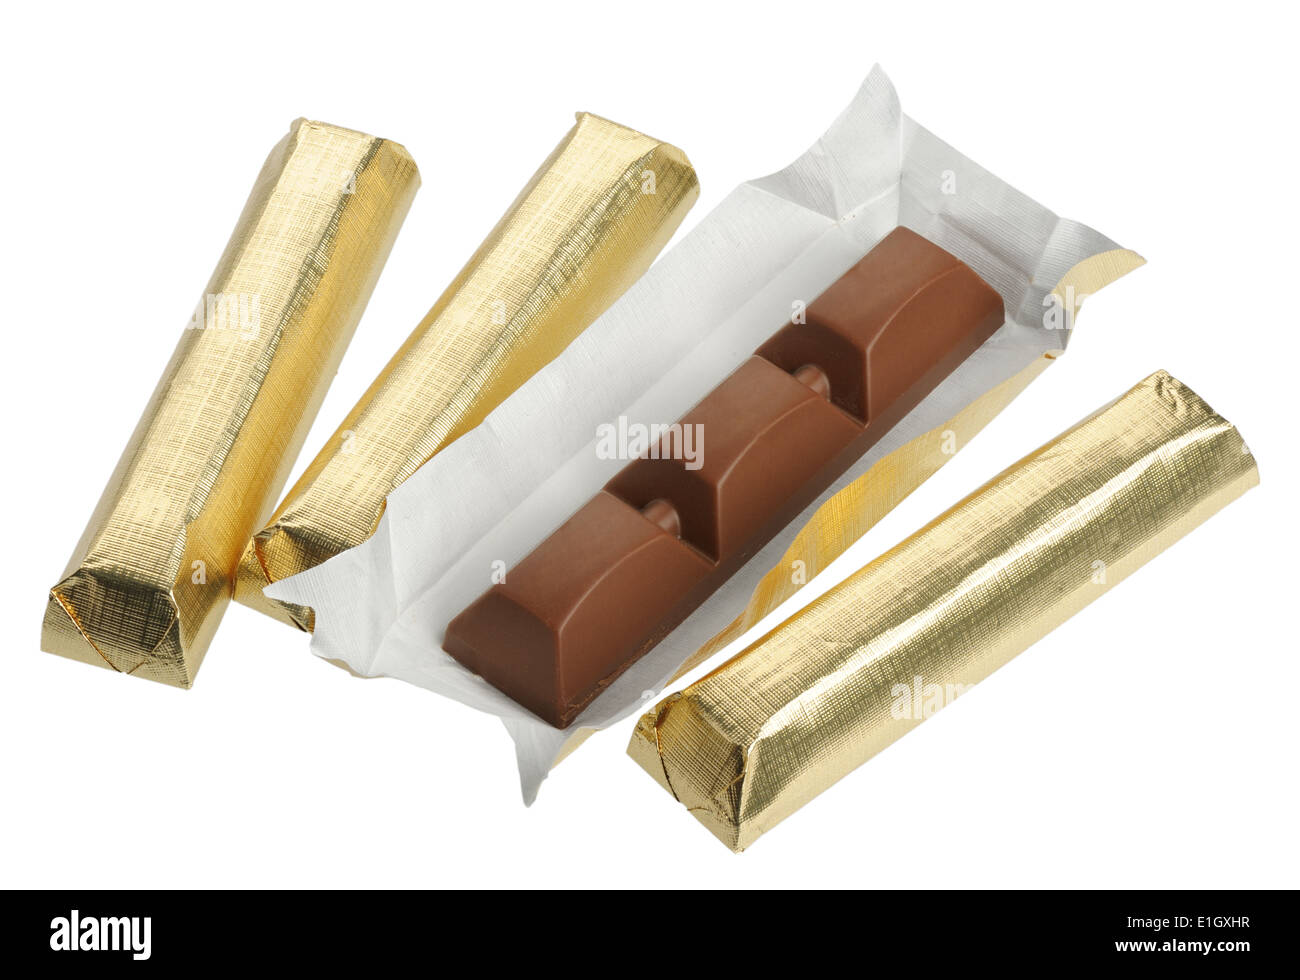 Bars of chocolate in gold foil, isolated on a white background Stock Photo  - Alamy